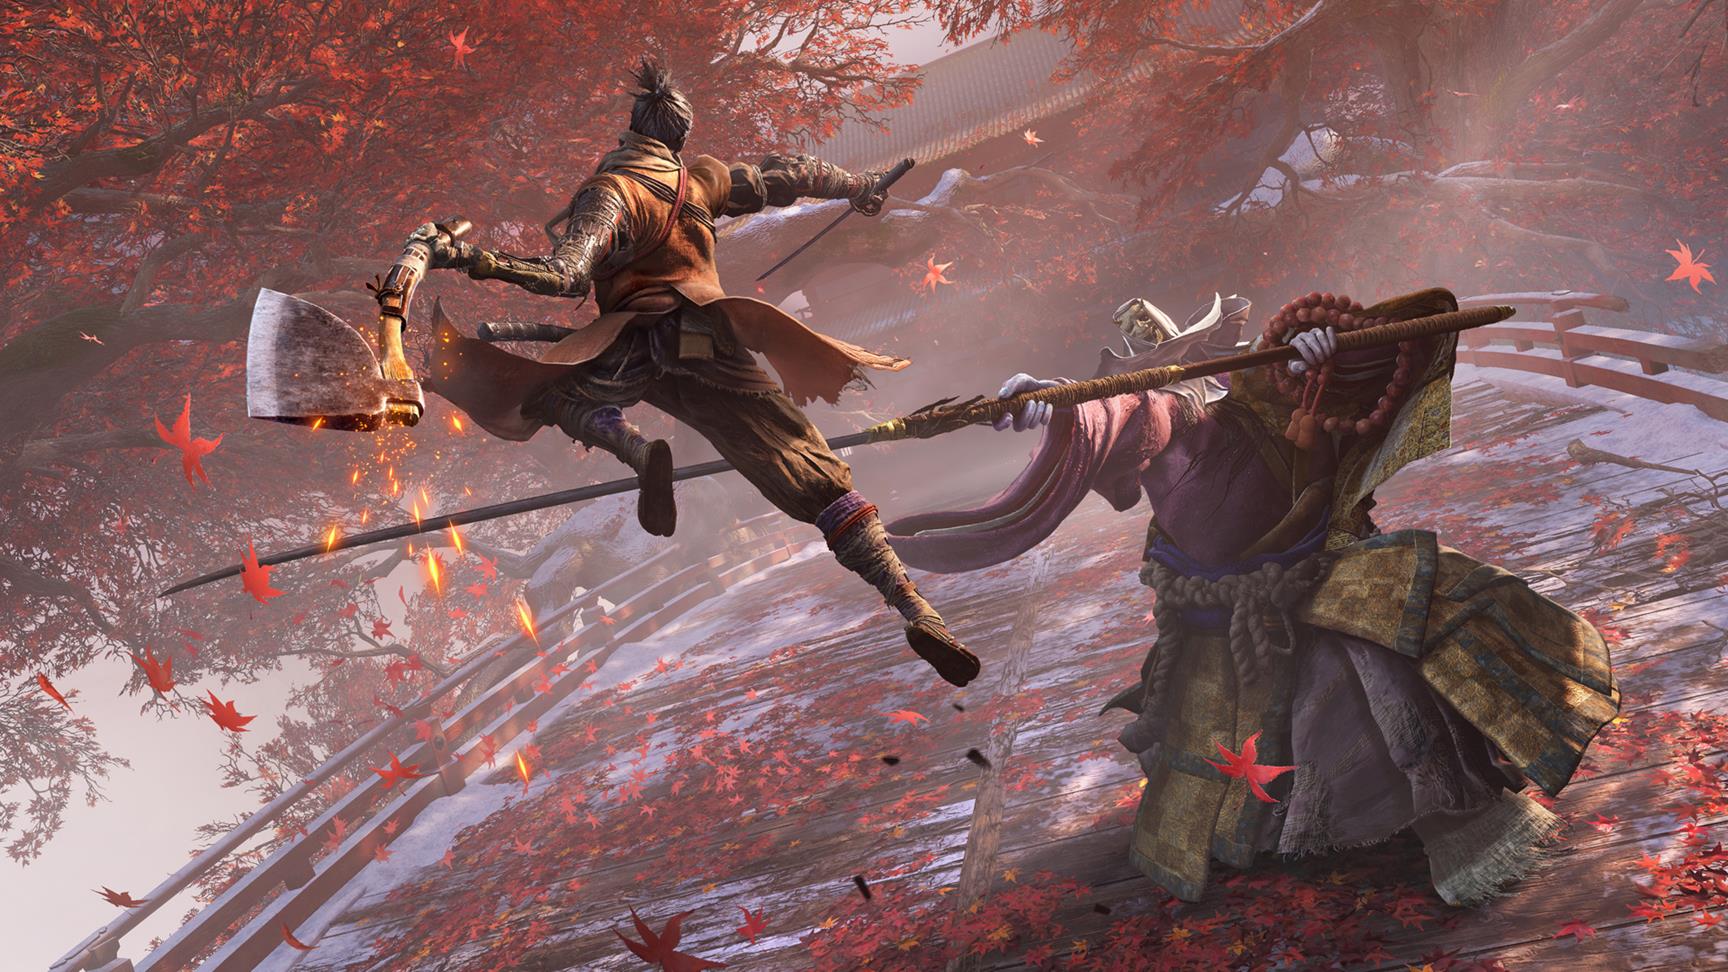 Image for Sekiro: Shadows Die Twice's game world among the studio's most open, hub area should be familiar to From fans